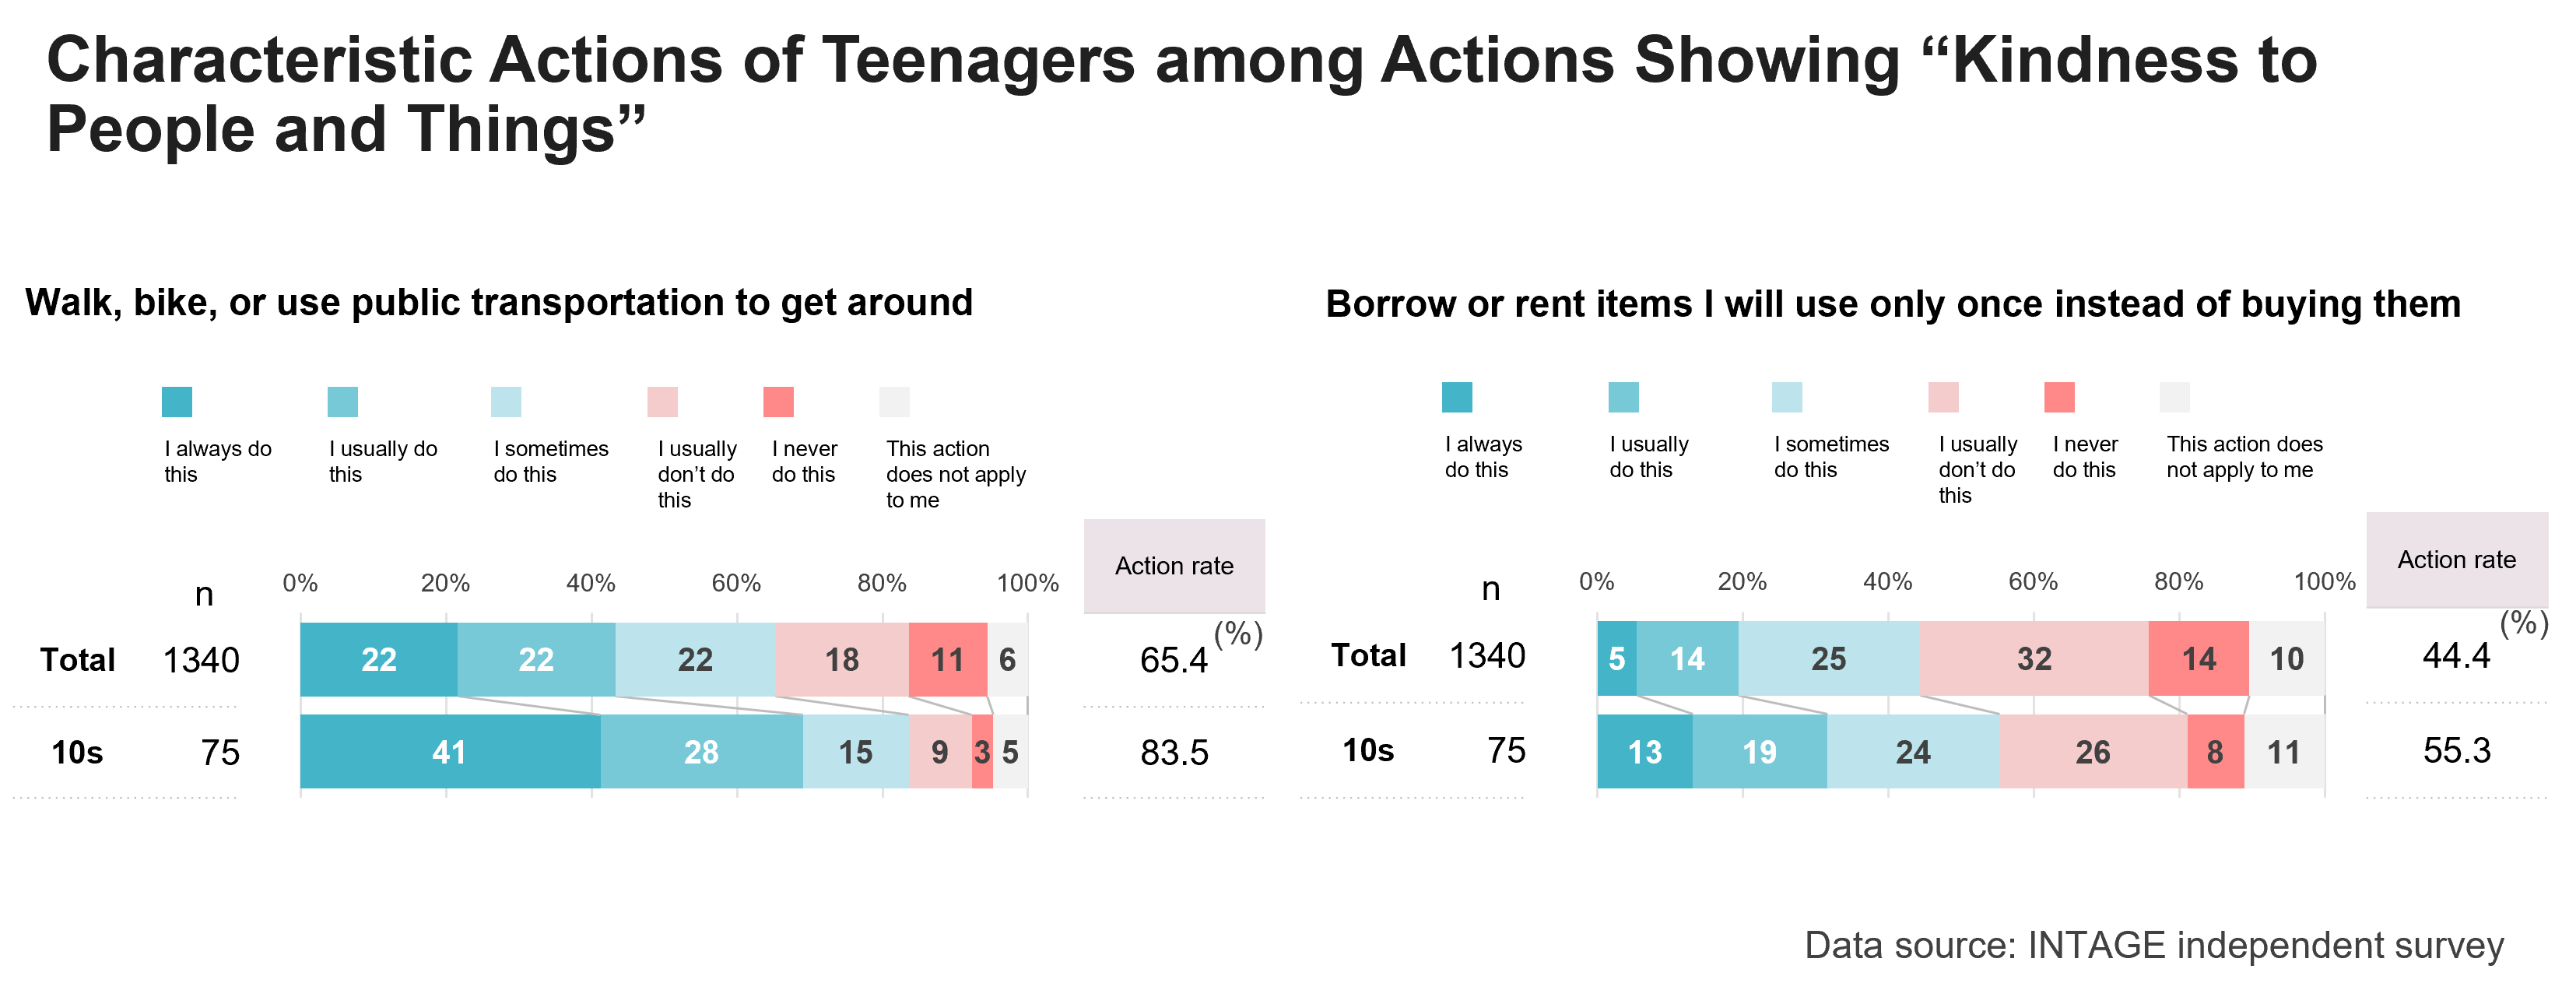 Characteristic Actions of Teenagers among Actions Showing "Kindness to People and Things"